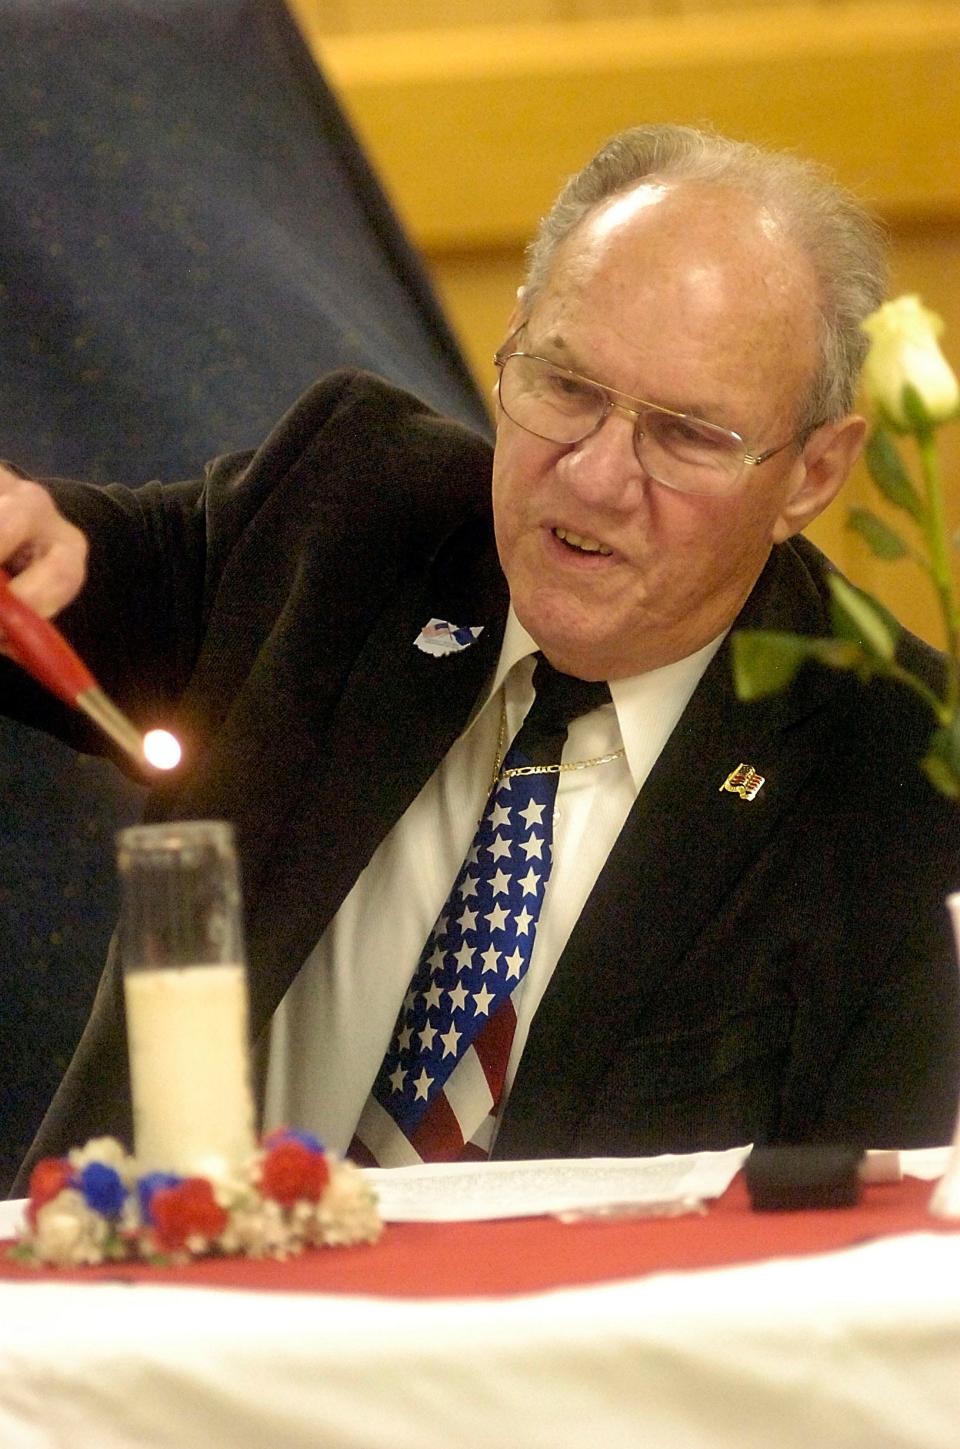 Don Earlenbaugh lights a candle for George Fox during the Four Chaplains Service held in February 2018 at Harrry Higgins Post 88.